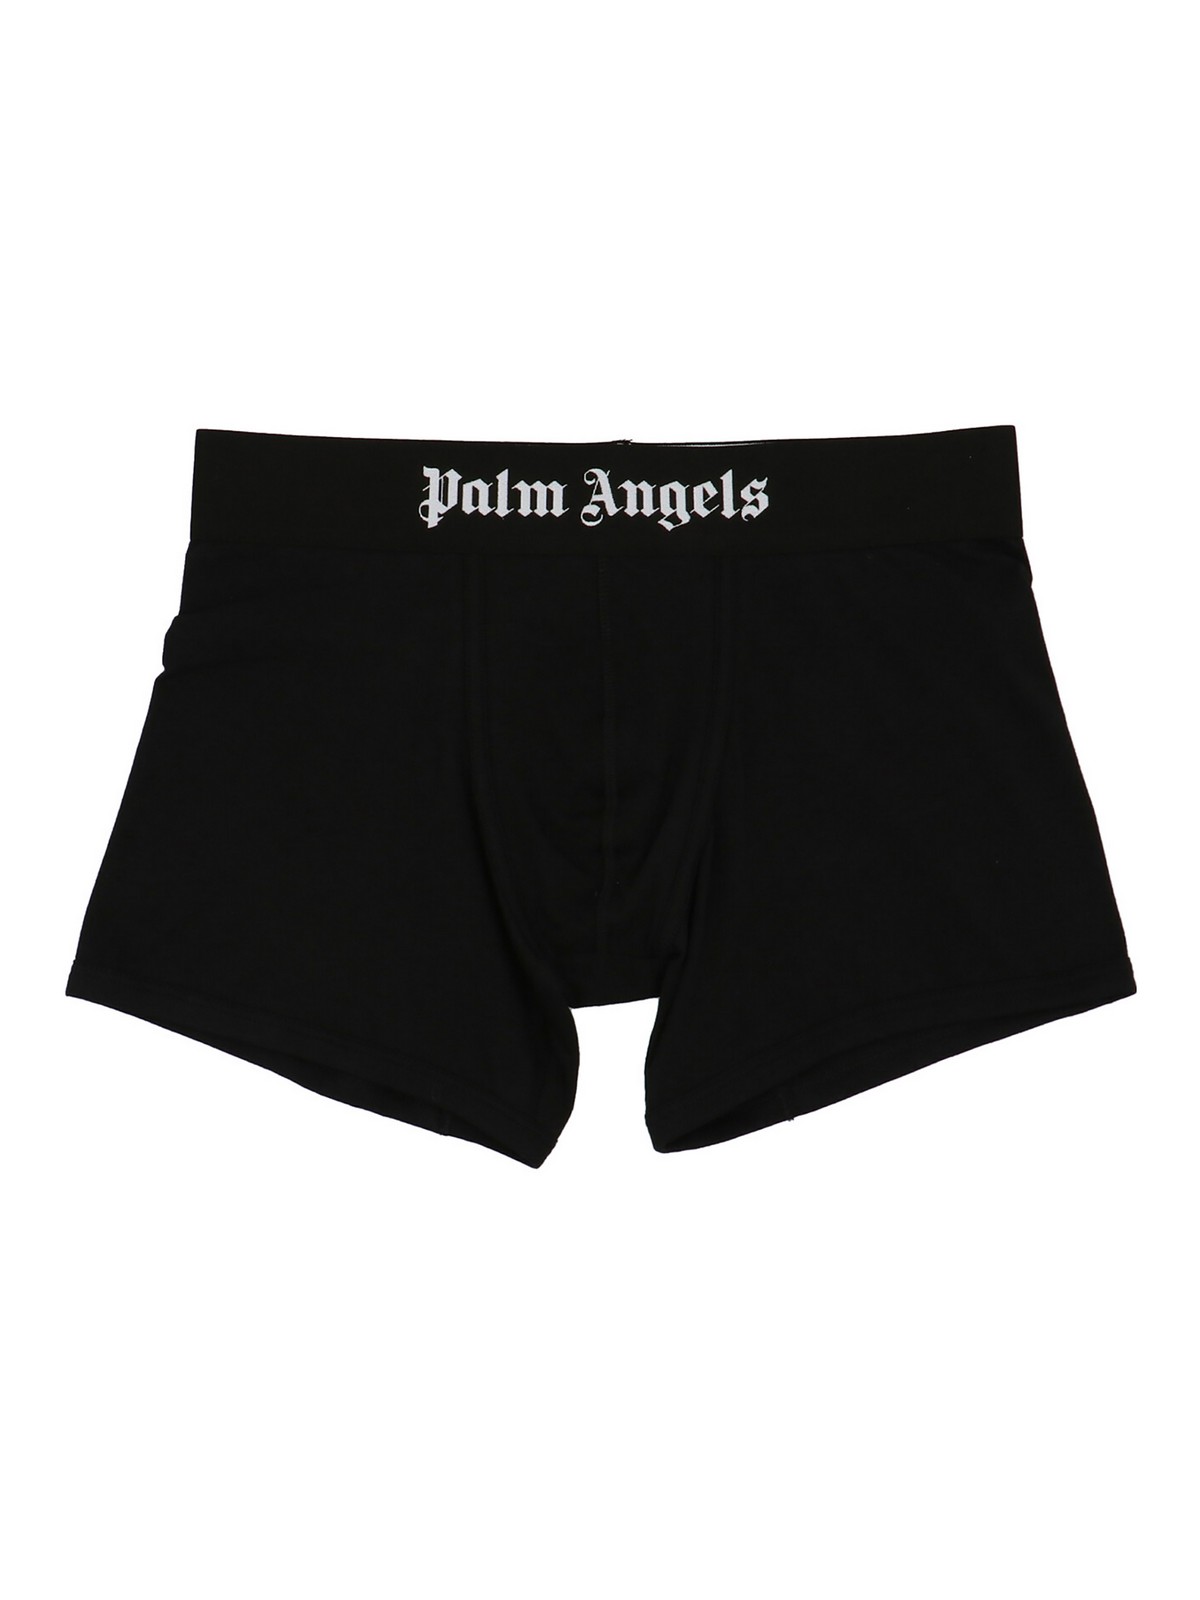 Palm Angels 2-boxer Logo Pack In White